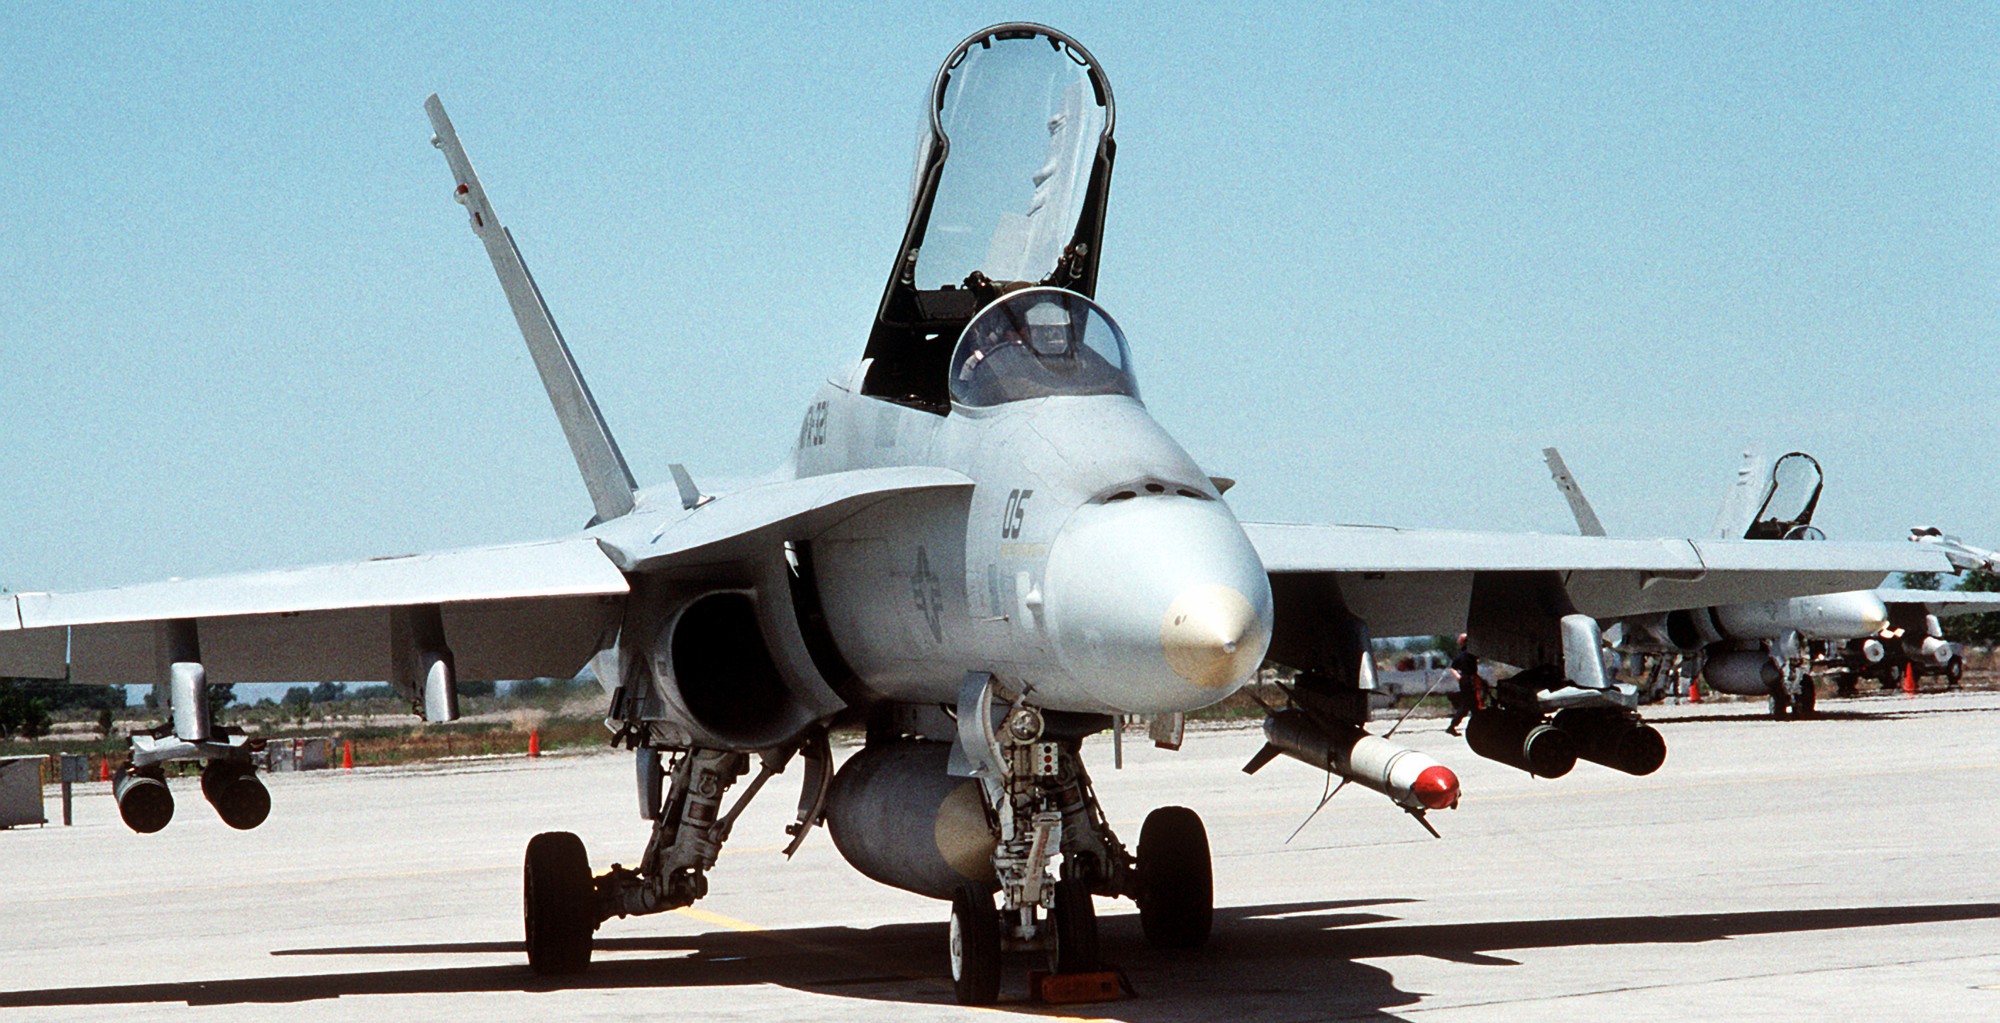 vmfa-321 hell's angels marine fighter attack squadron usmc f/a-18a hornet 31 agm-84 harm missile